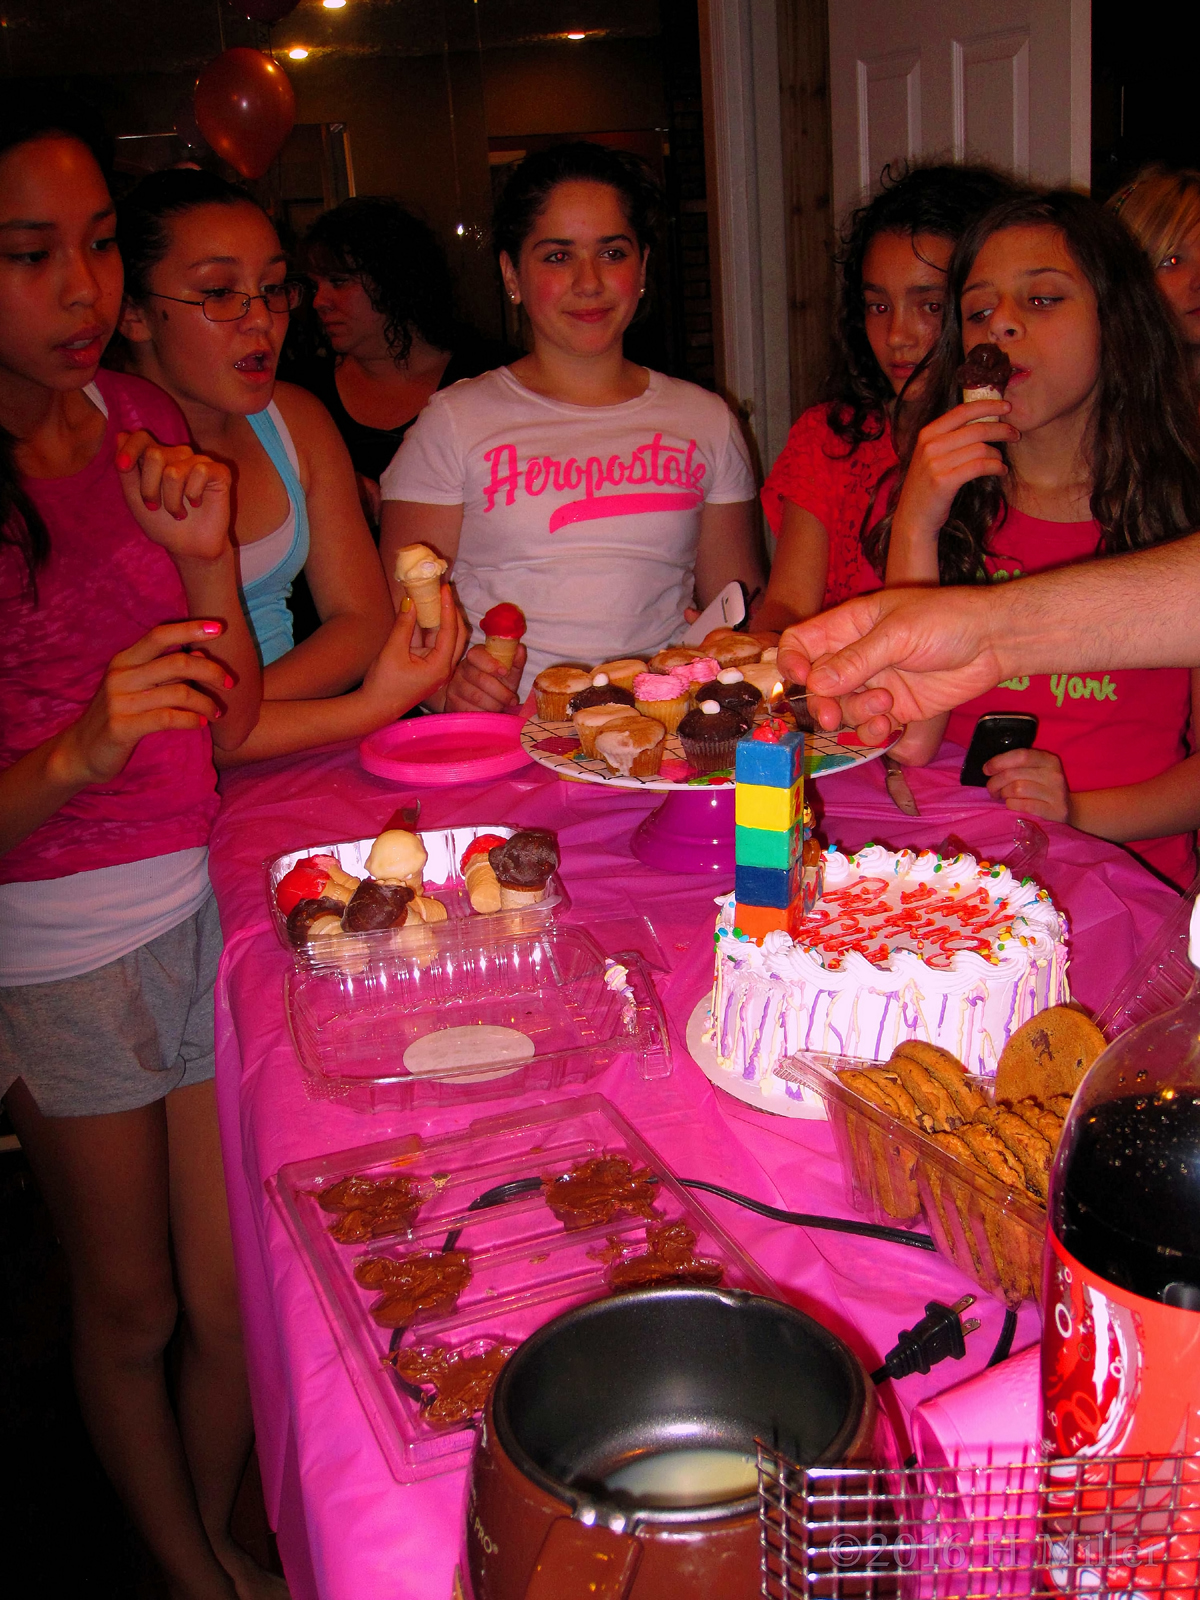 The Girls Spa Party Is Even More Fun With Cupcakes And Other Sweet Snacks! 